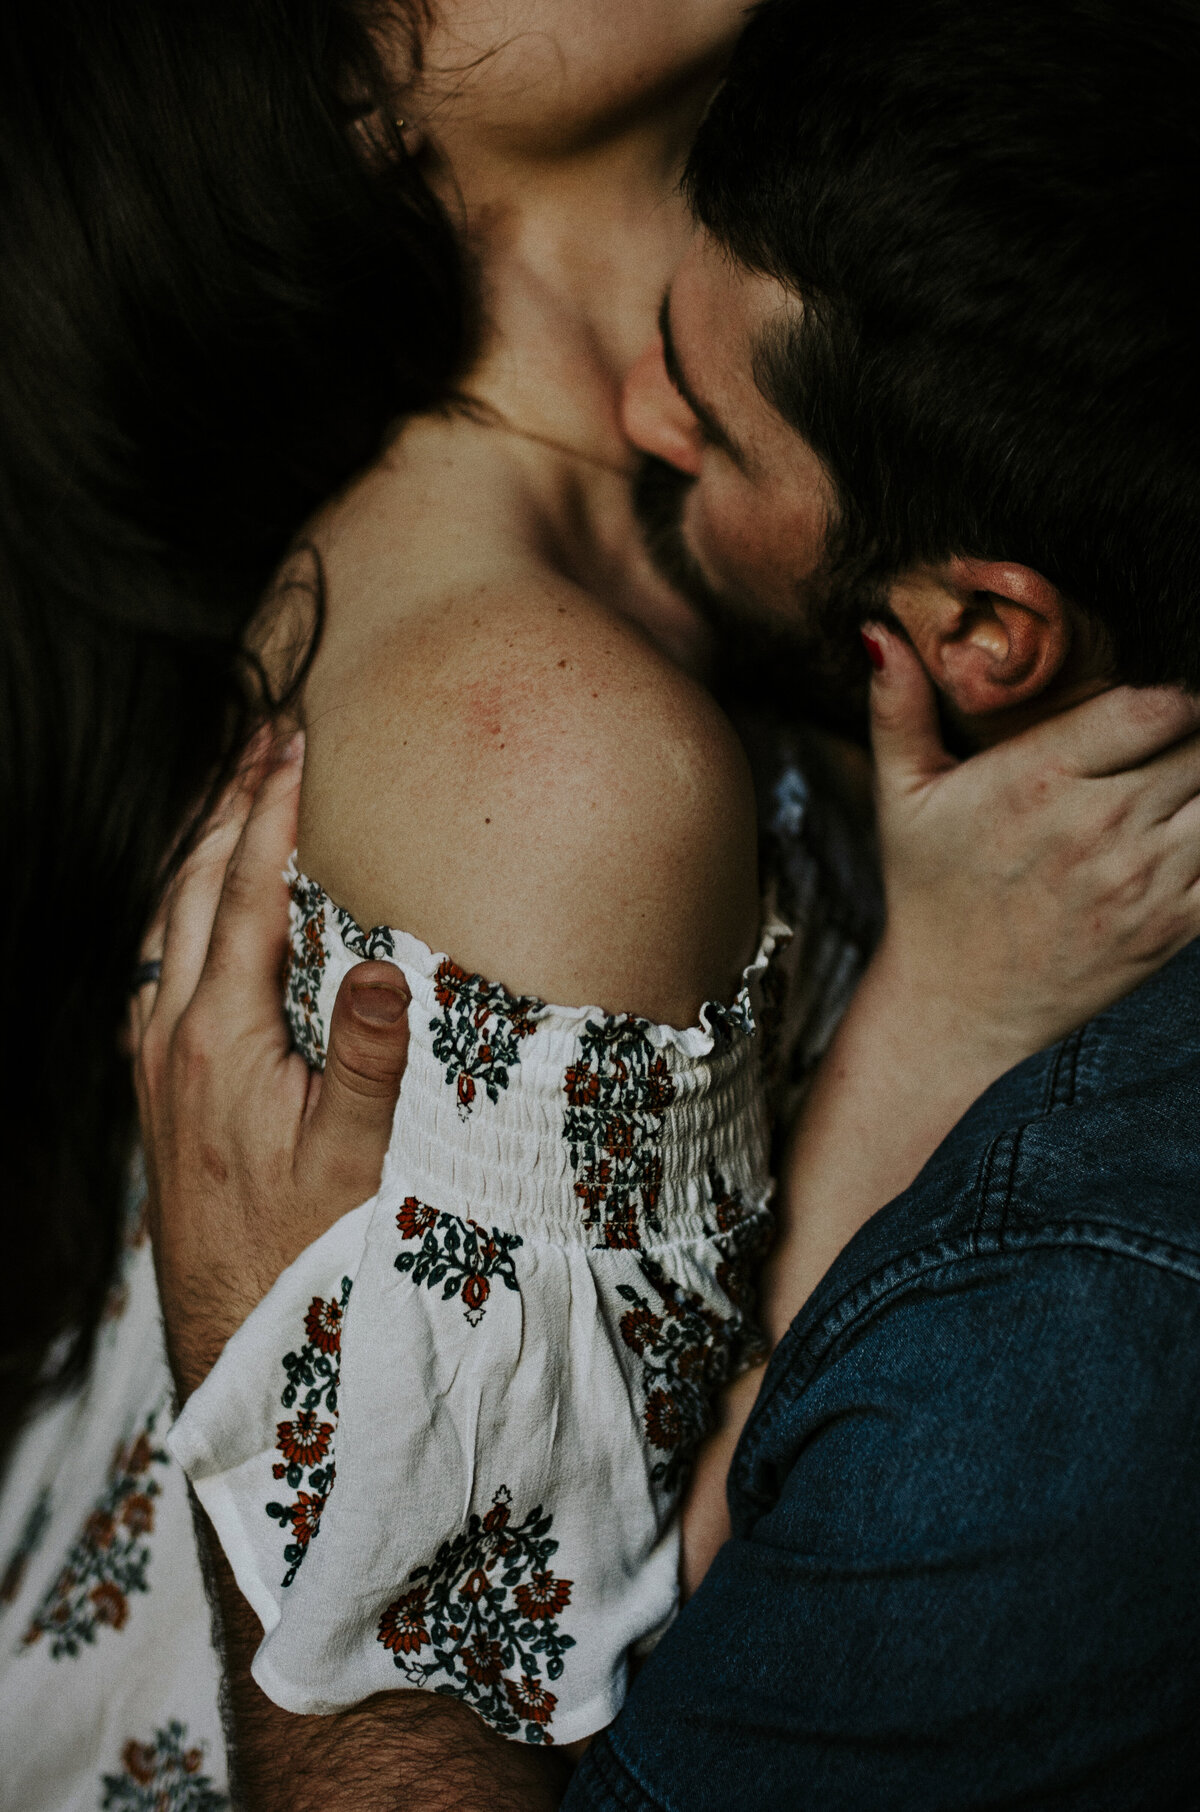 Capturing the essence of love, this intimate portrait showcases a tender moment as a husband passionately kisses his wife's neck. Explore the beauty of connection and romance in this evocative couple's portra